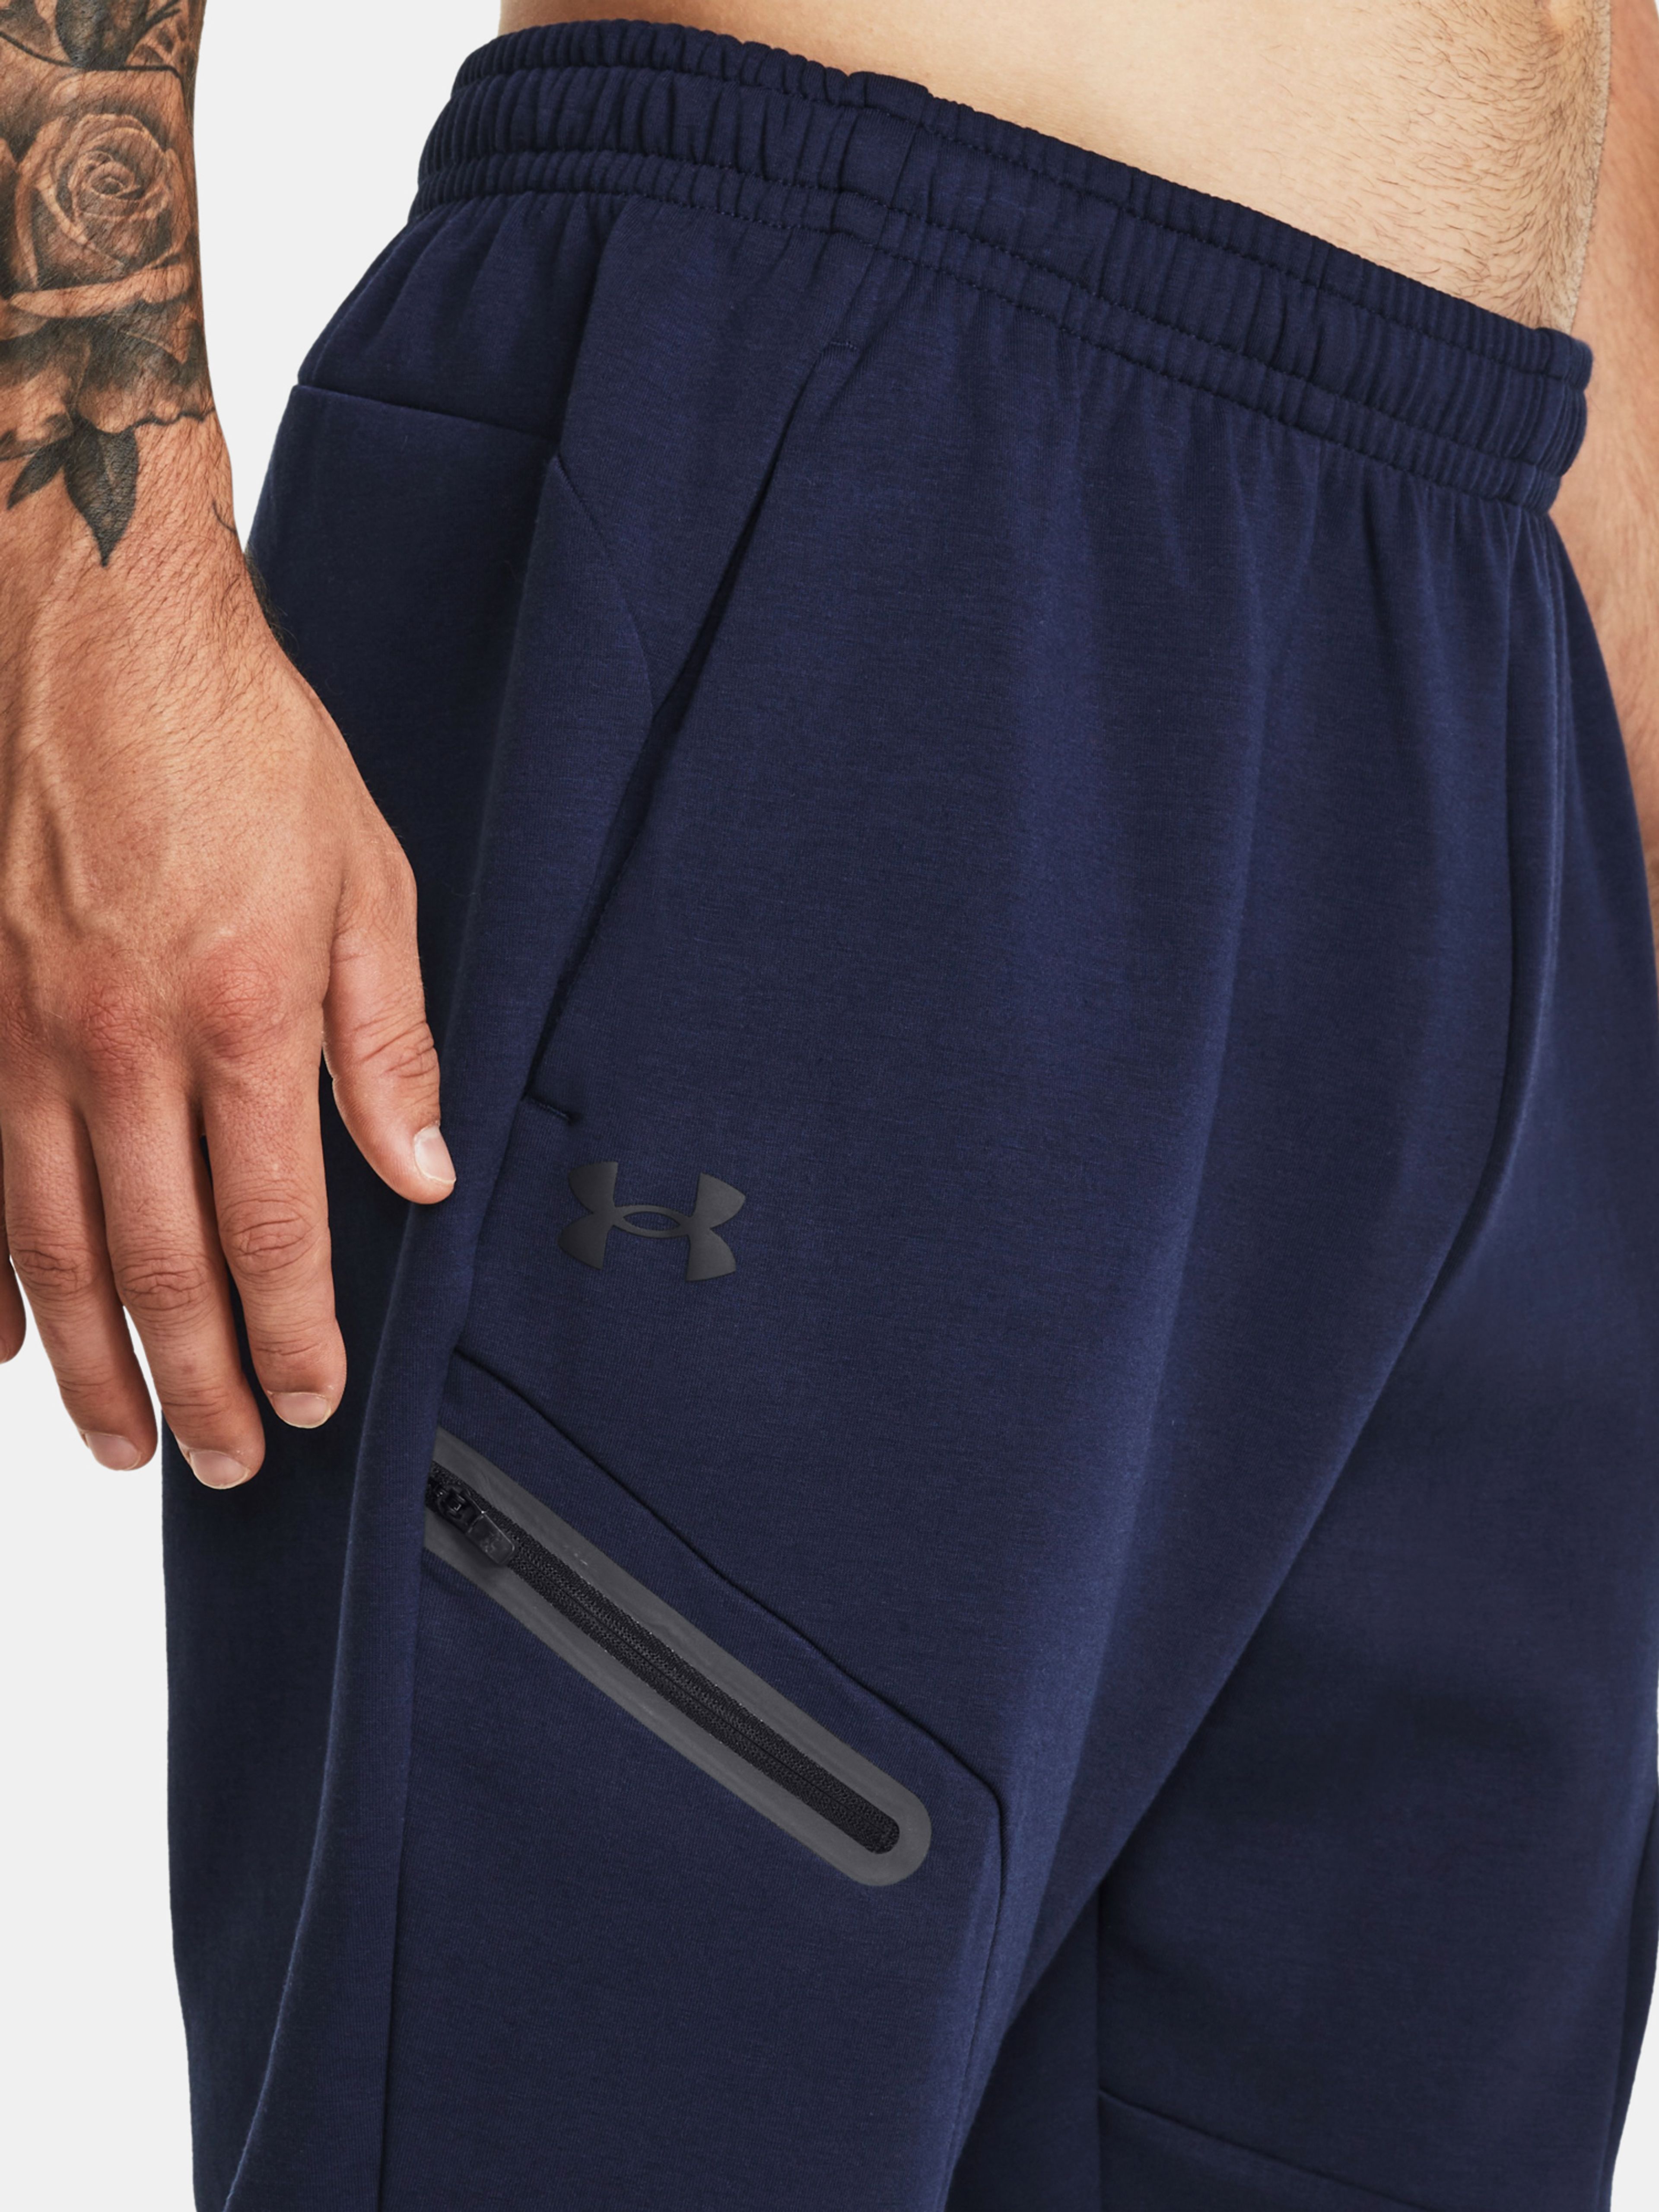 Under Armour Ua Unstoppable Joggers-Blu